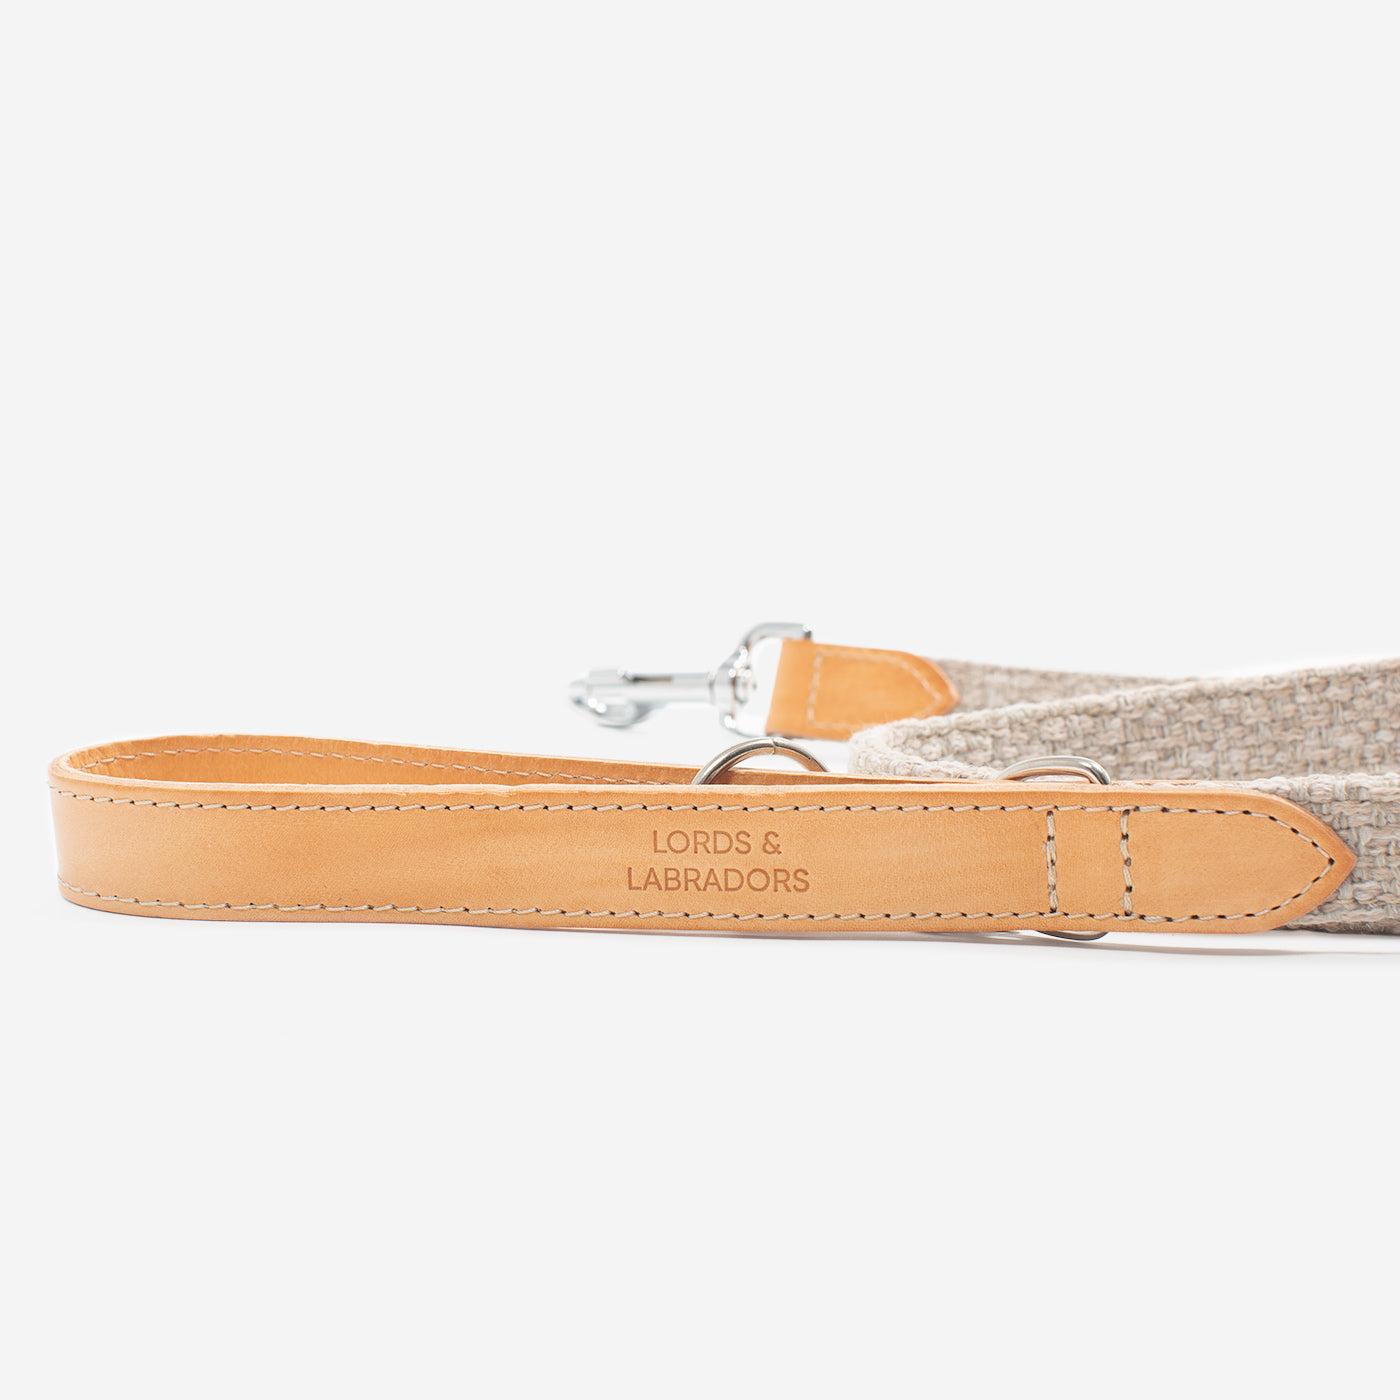 Discover dog walking luxury with our handcrafted Italian Herdwick dog lead in beautiful Sandstone with woven natural sandstone fabric! The perfect lead for dogs available now at Lords & Labradors    